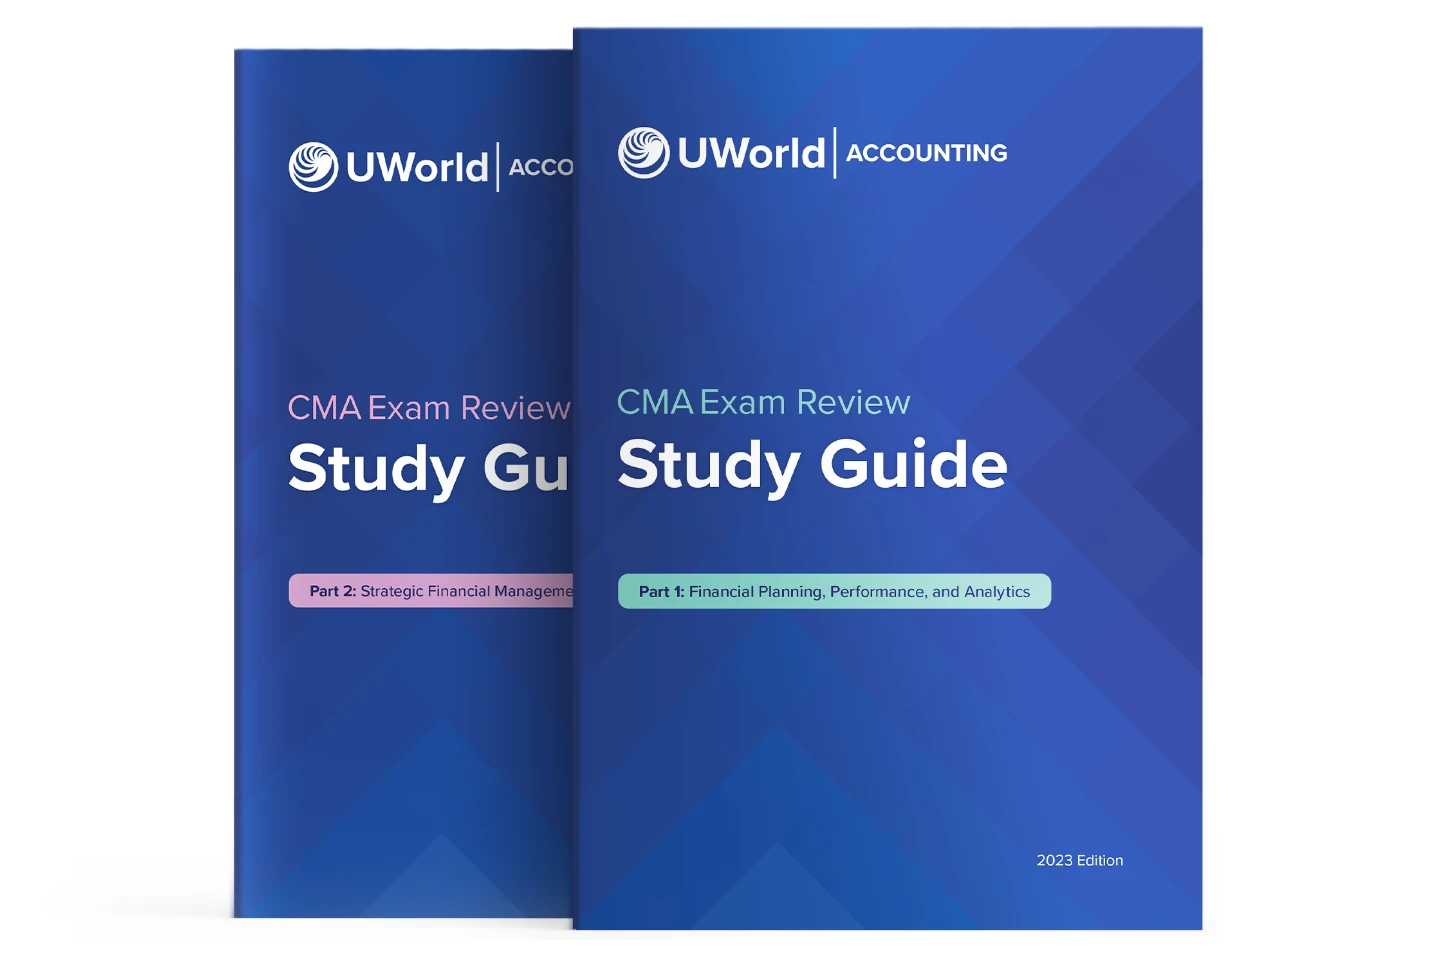 UWorld CMA Review Study Guide covers